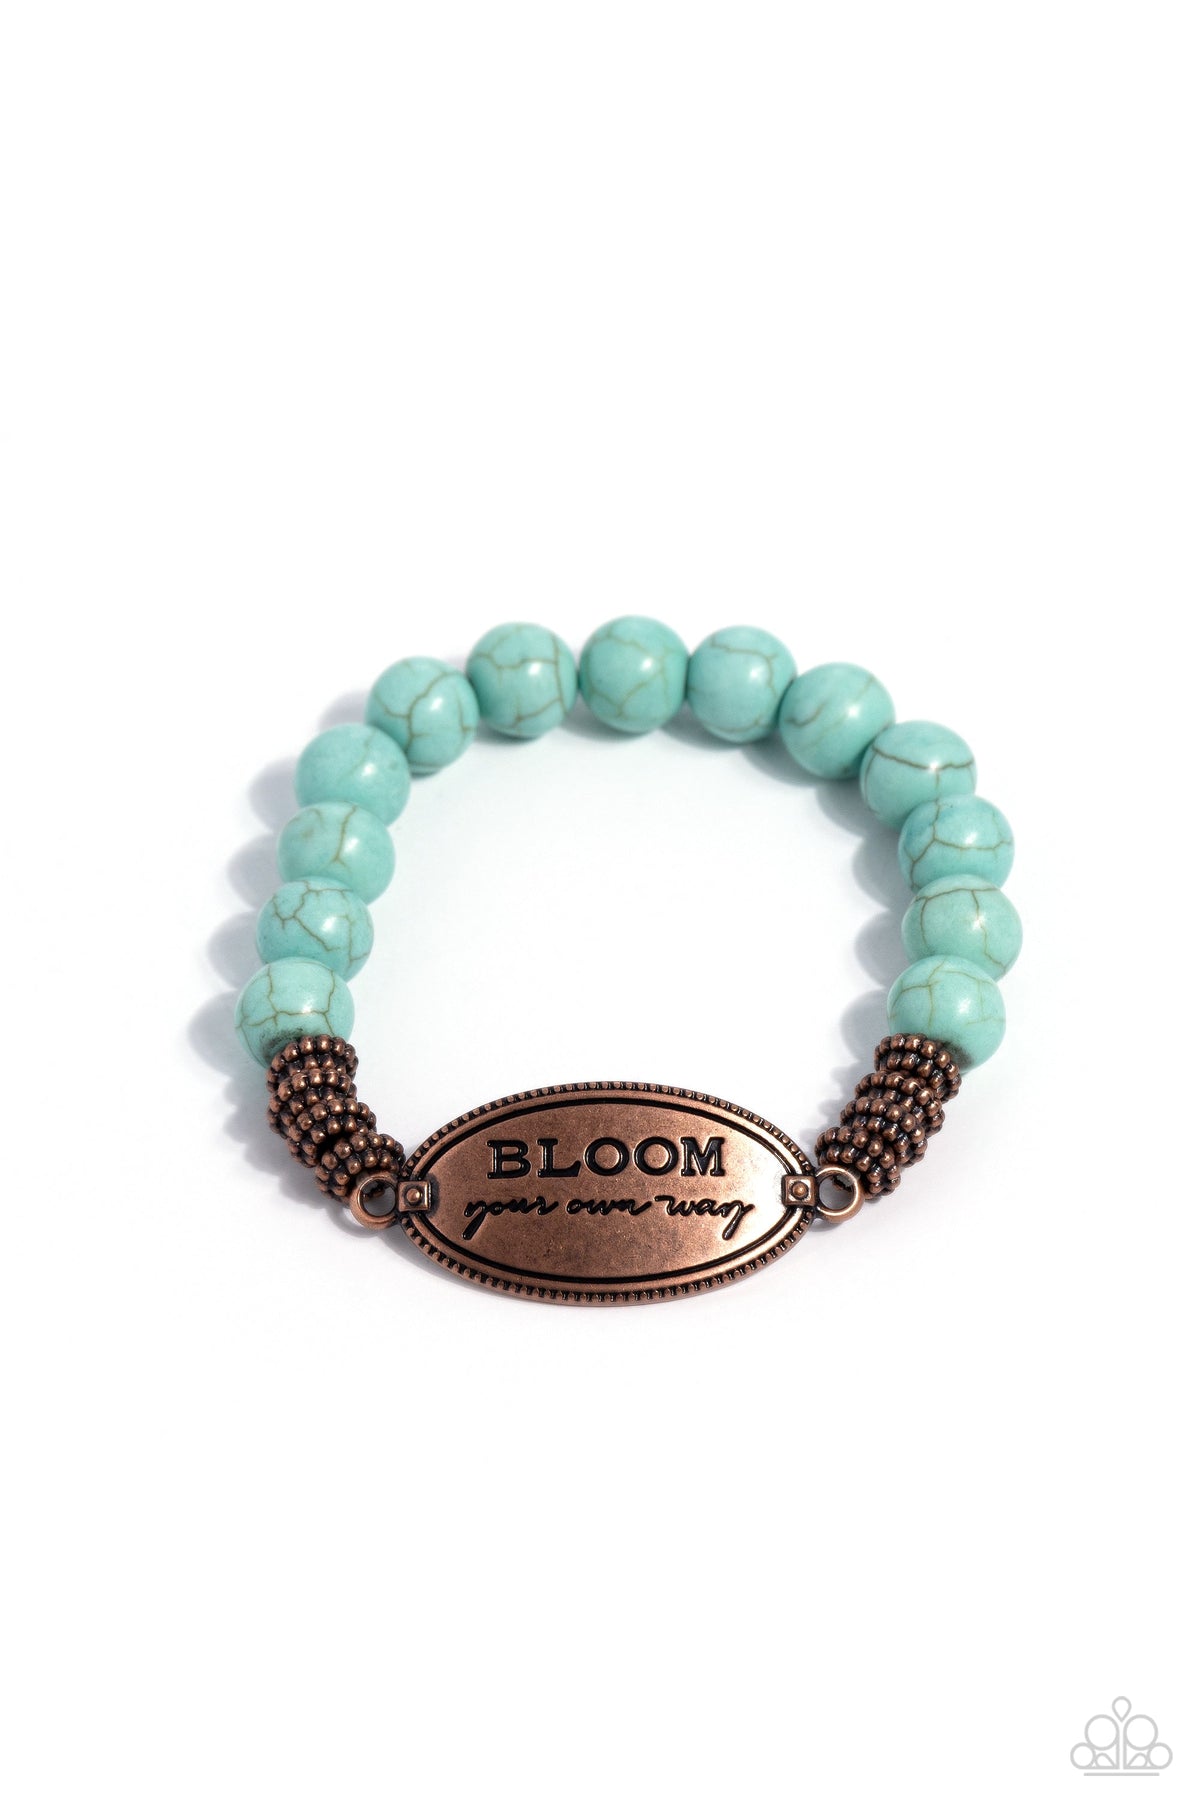 Bedouin Bloom Copper &amp; Turquoise Blue Stone Inspirational Bracelet - Paparazzi Accessories- lightbox - CarasShop.com - $5 Jewelry by Cara Jewels